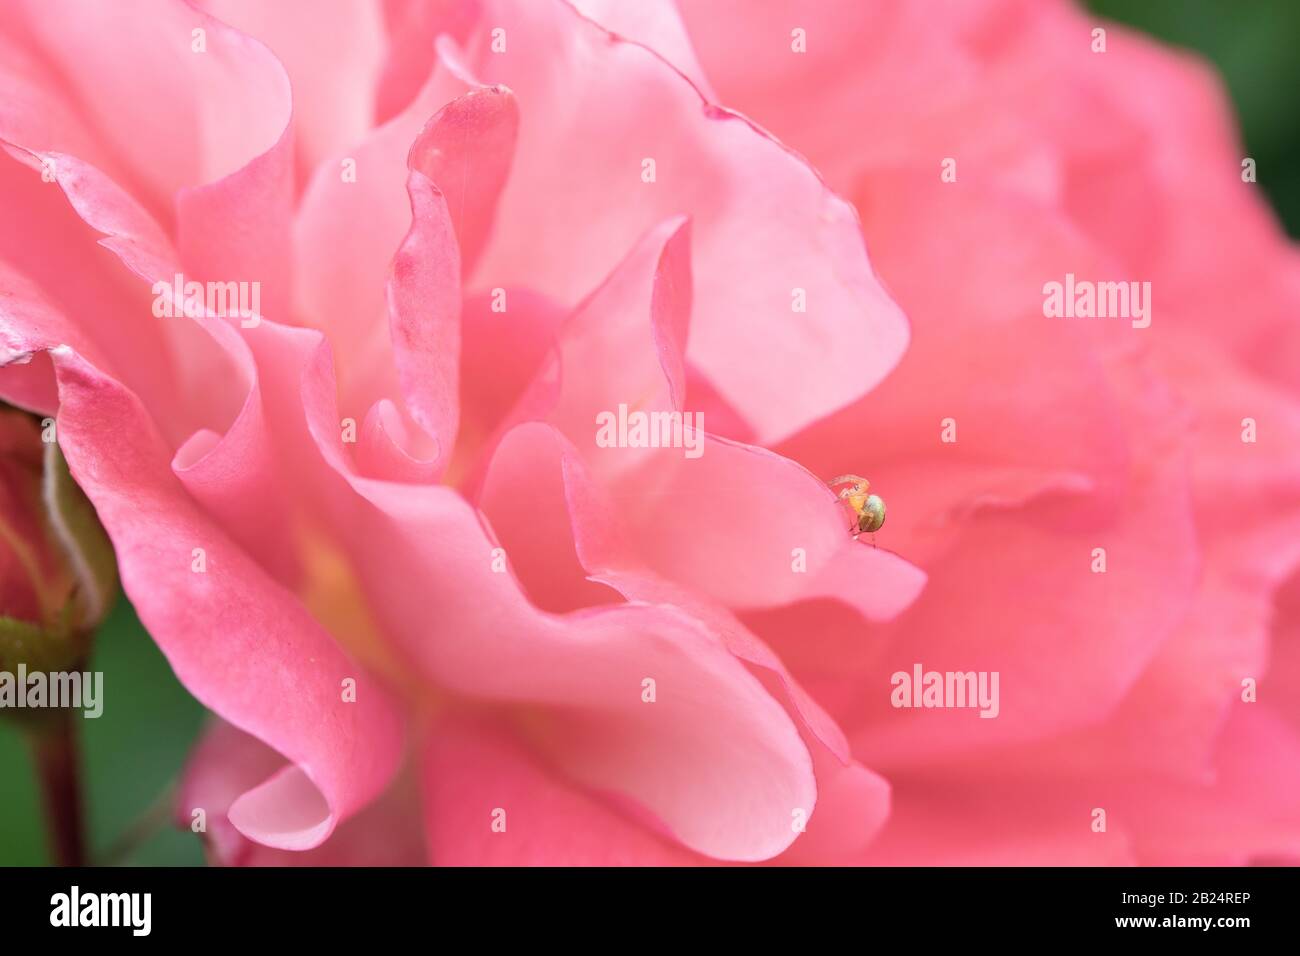 Tiny Spider on a Pink Rose Petal Stock Photo